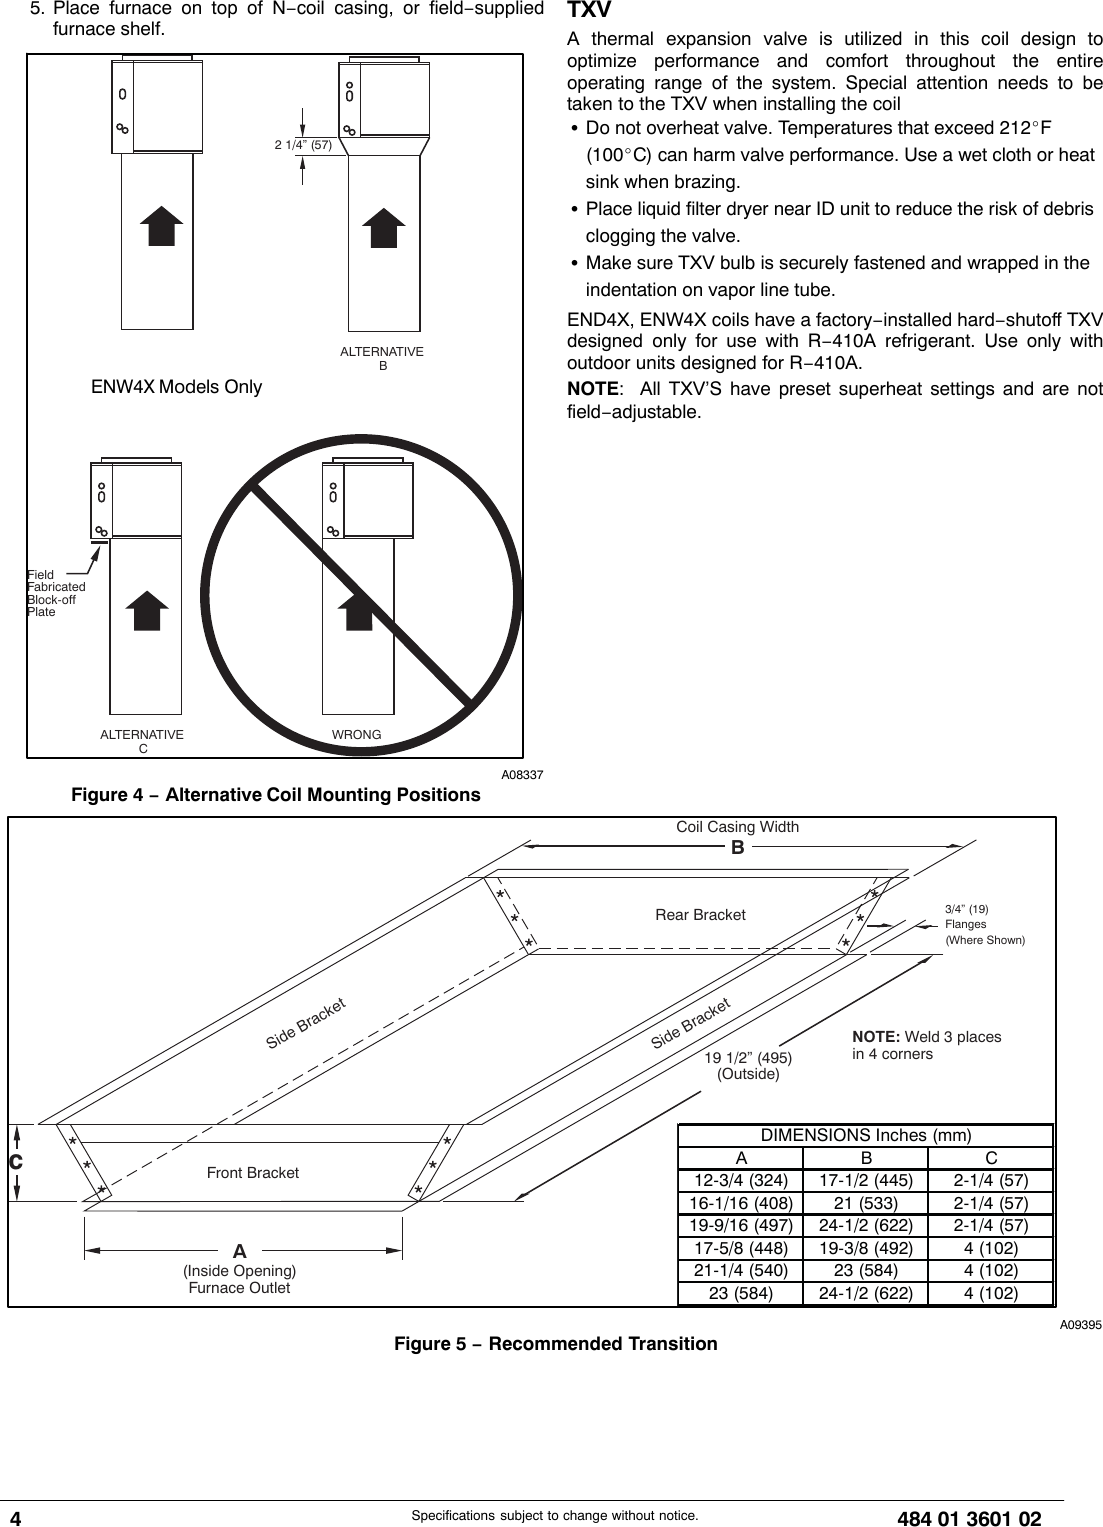 Page 4 of 6 - ICP END4X36L17A1 48401360102 User Manual  EVAPORATOR COILS - Manuals And Guides 1709106L